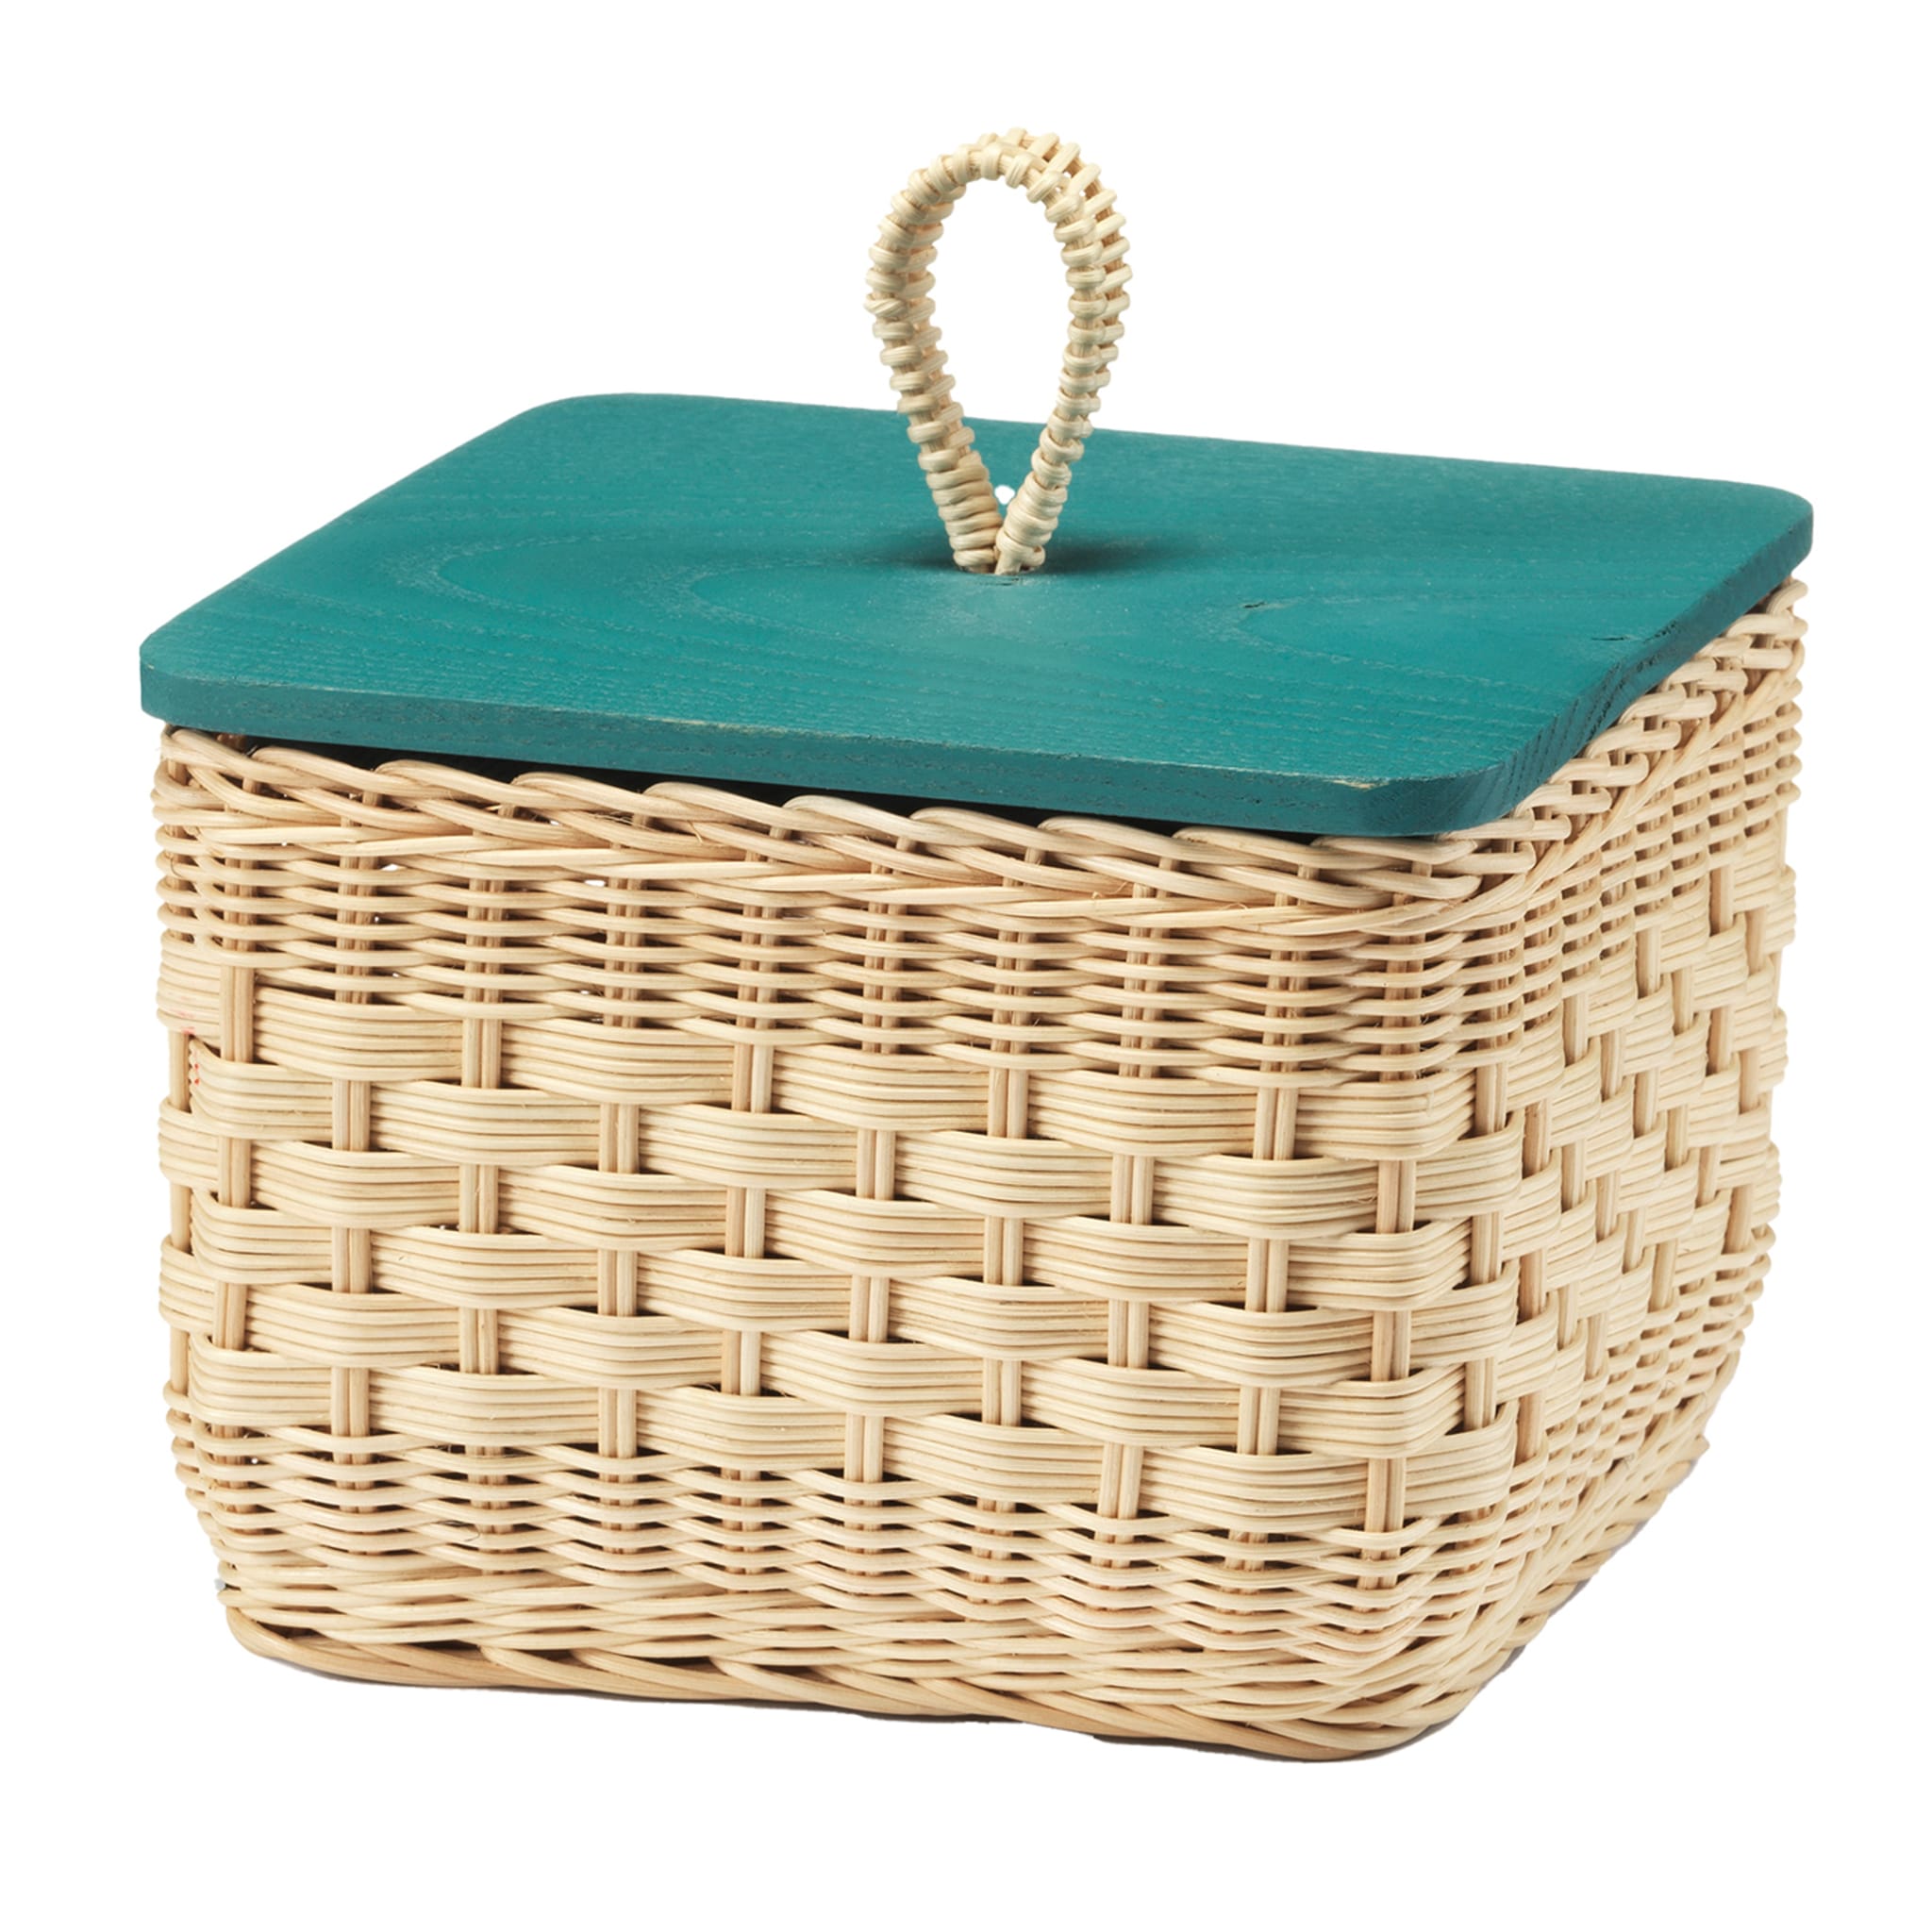 Coralia Square Wicker Box with Peacock Blue Lid - Main view